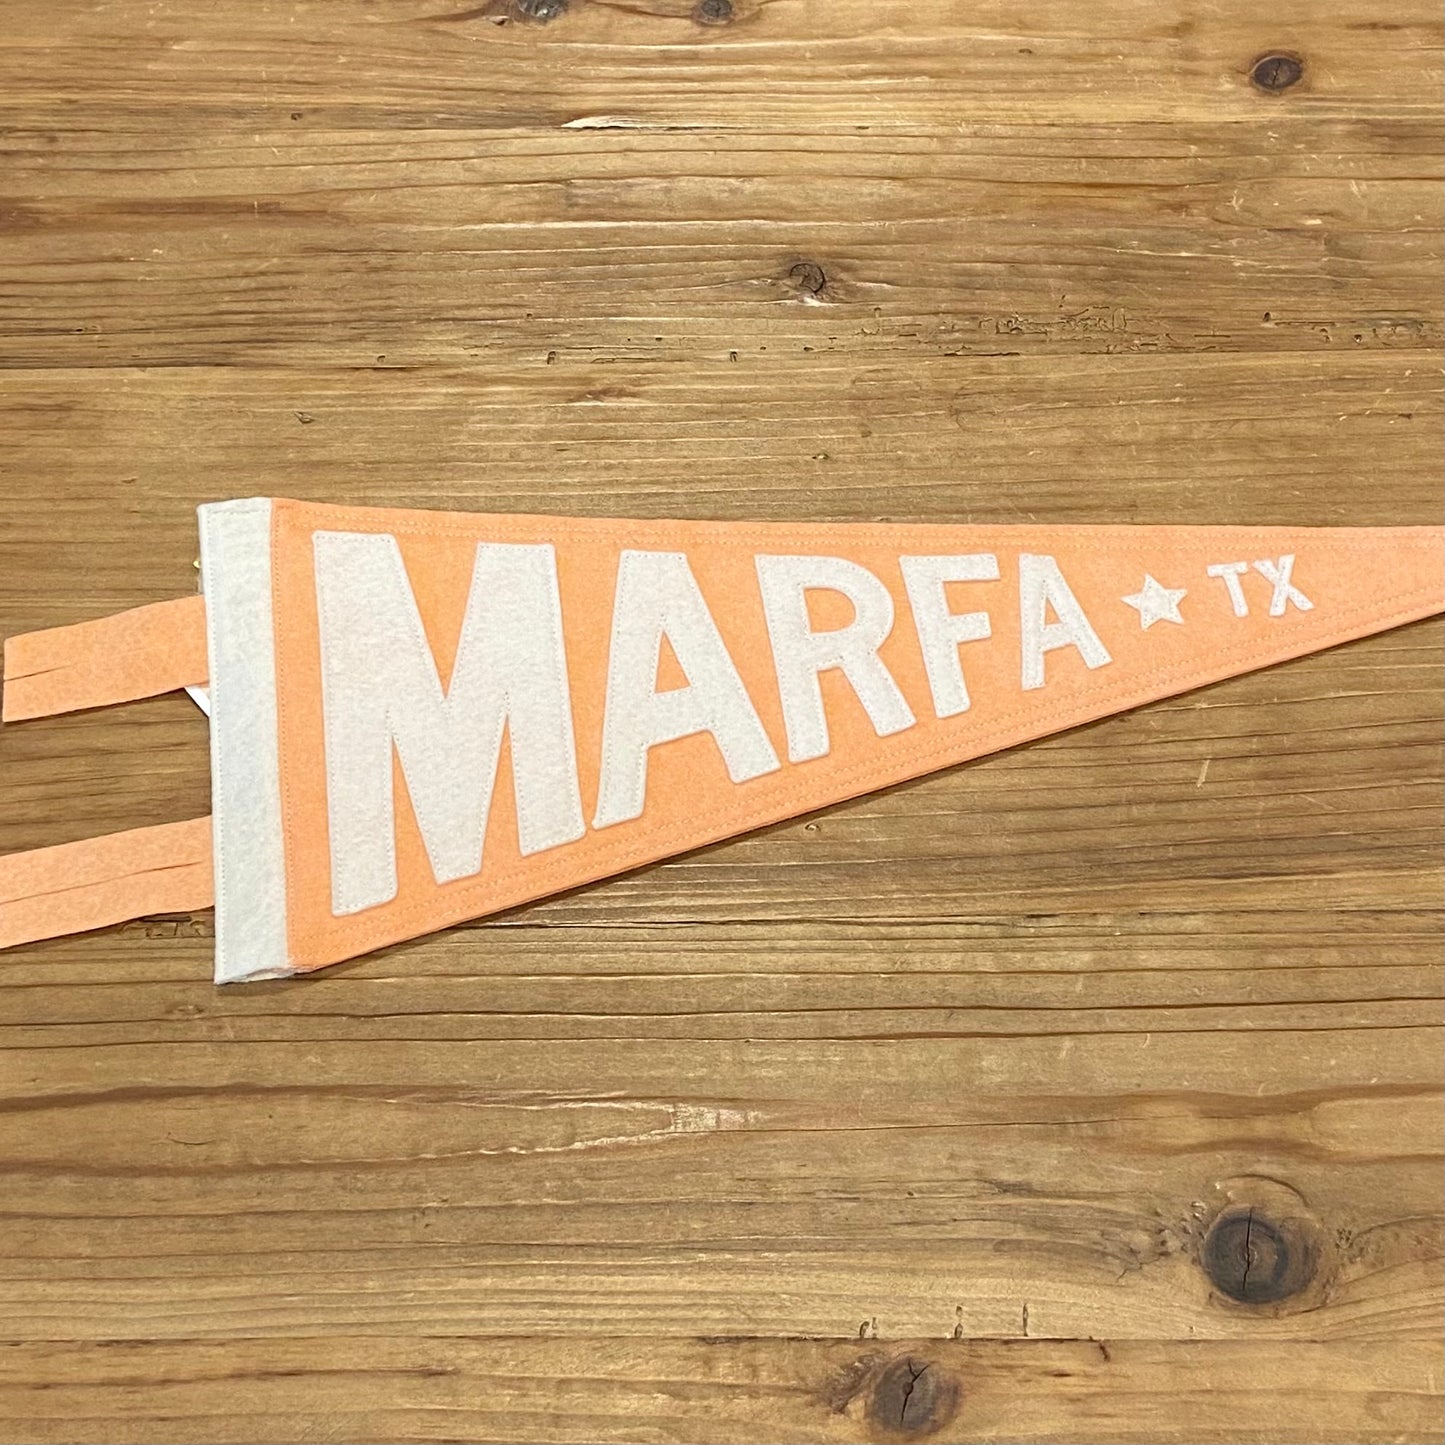 Marfa Texas Handmade Felt Pennants at 6Whiskey six whisky in color peach with white letters